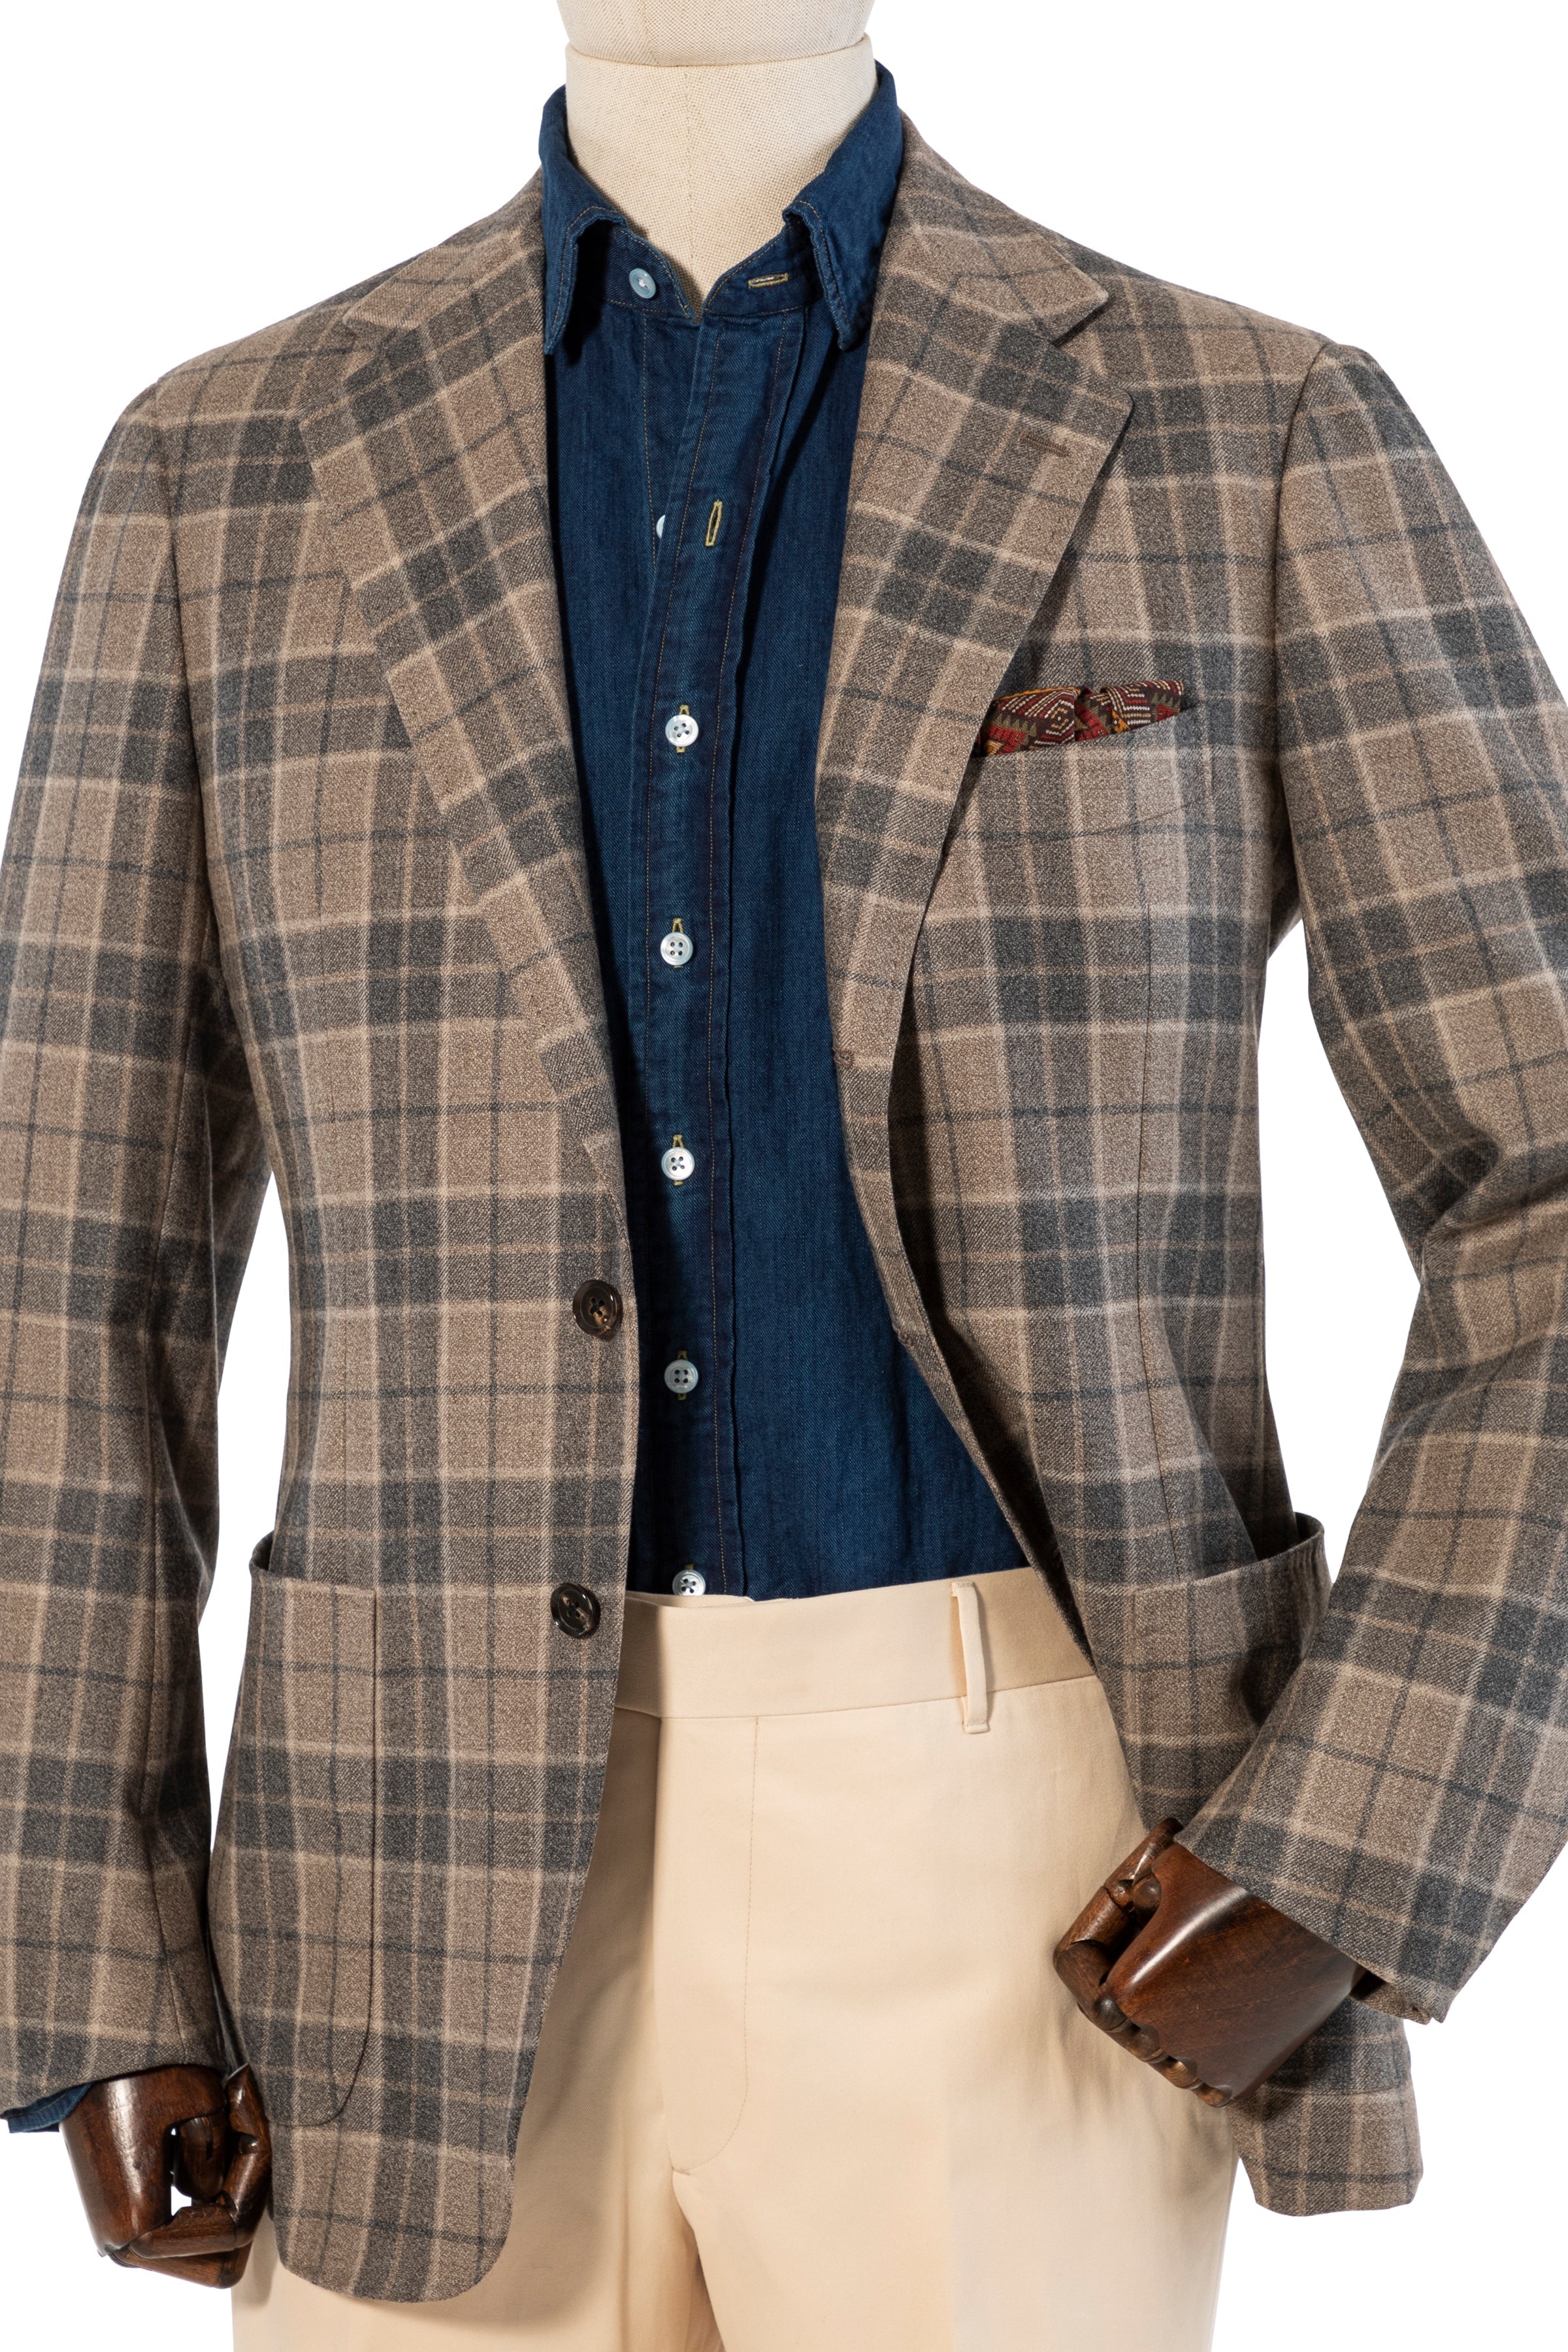 The Armoury by Ring Jacket Model 3 Beige Grey Wool-Cashmere Check Sport Coat